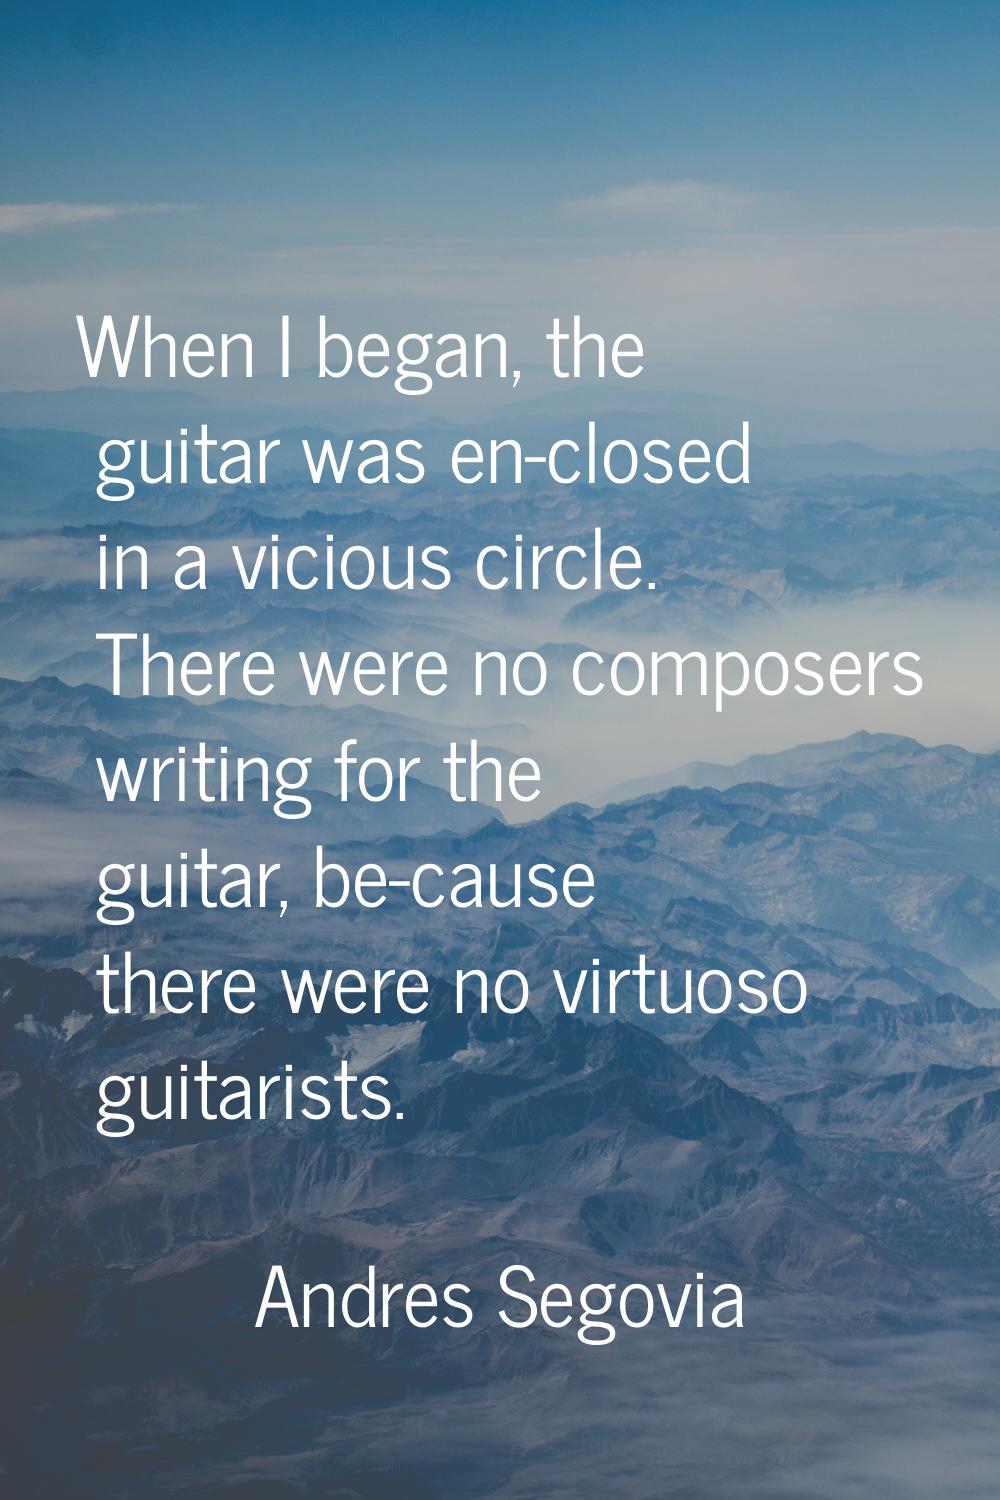 When I began, the guitar was en-closed in a vicious circle. There were no composers writing for the